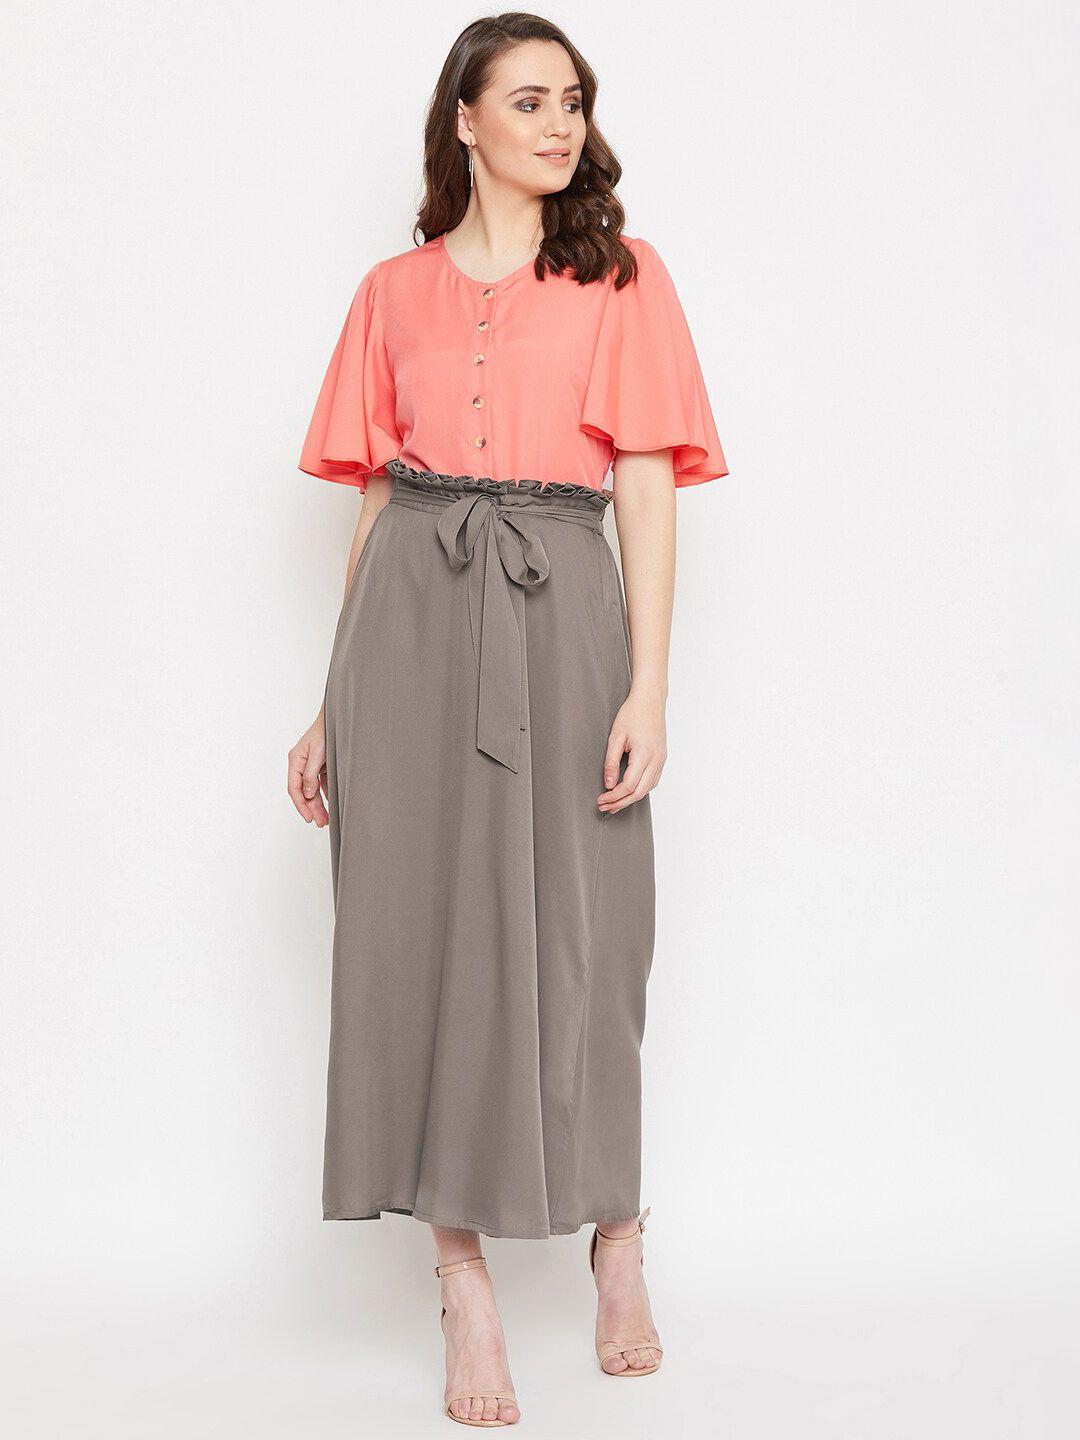 bitterlime women coral & grey flutter sleeves top with skirt